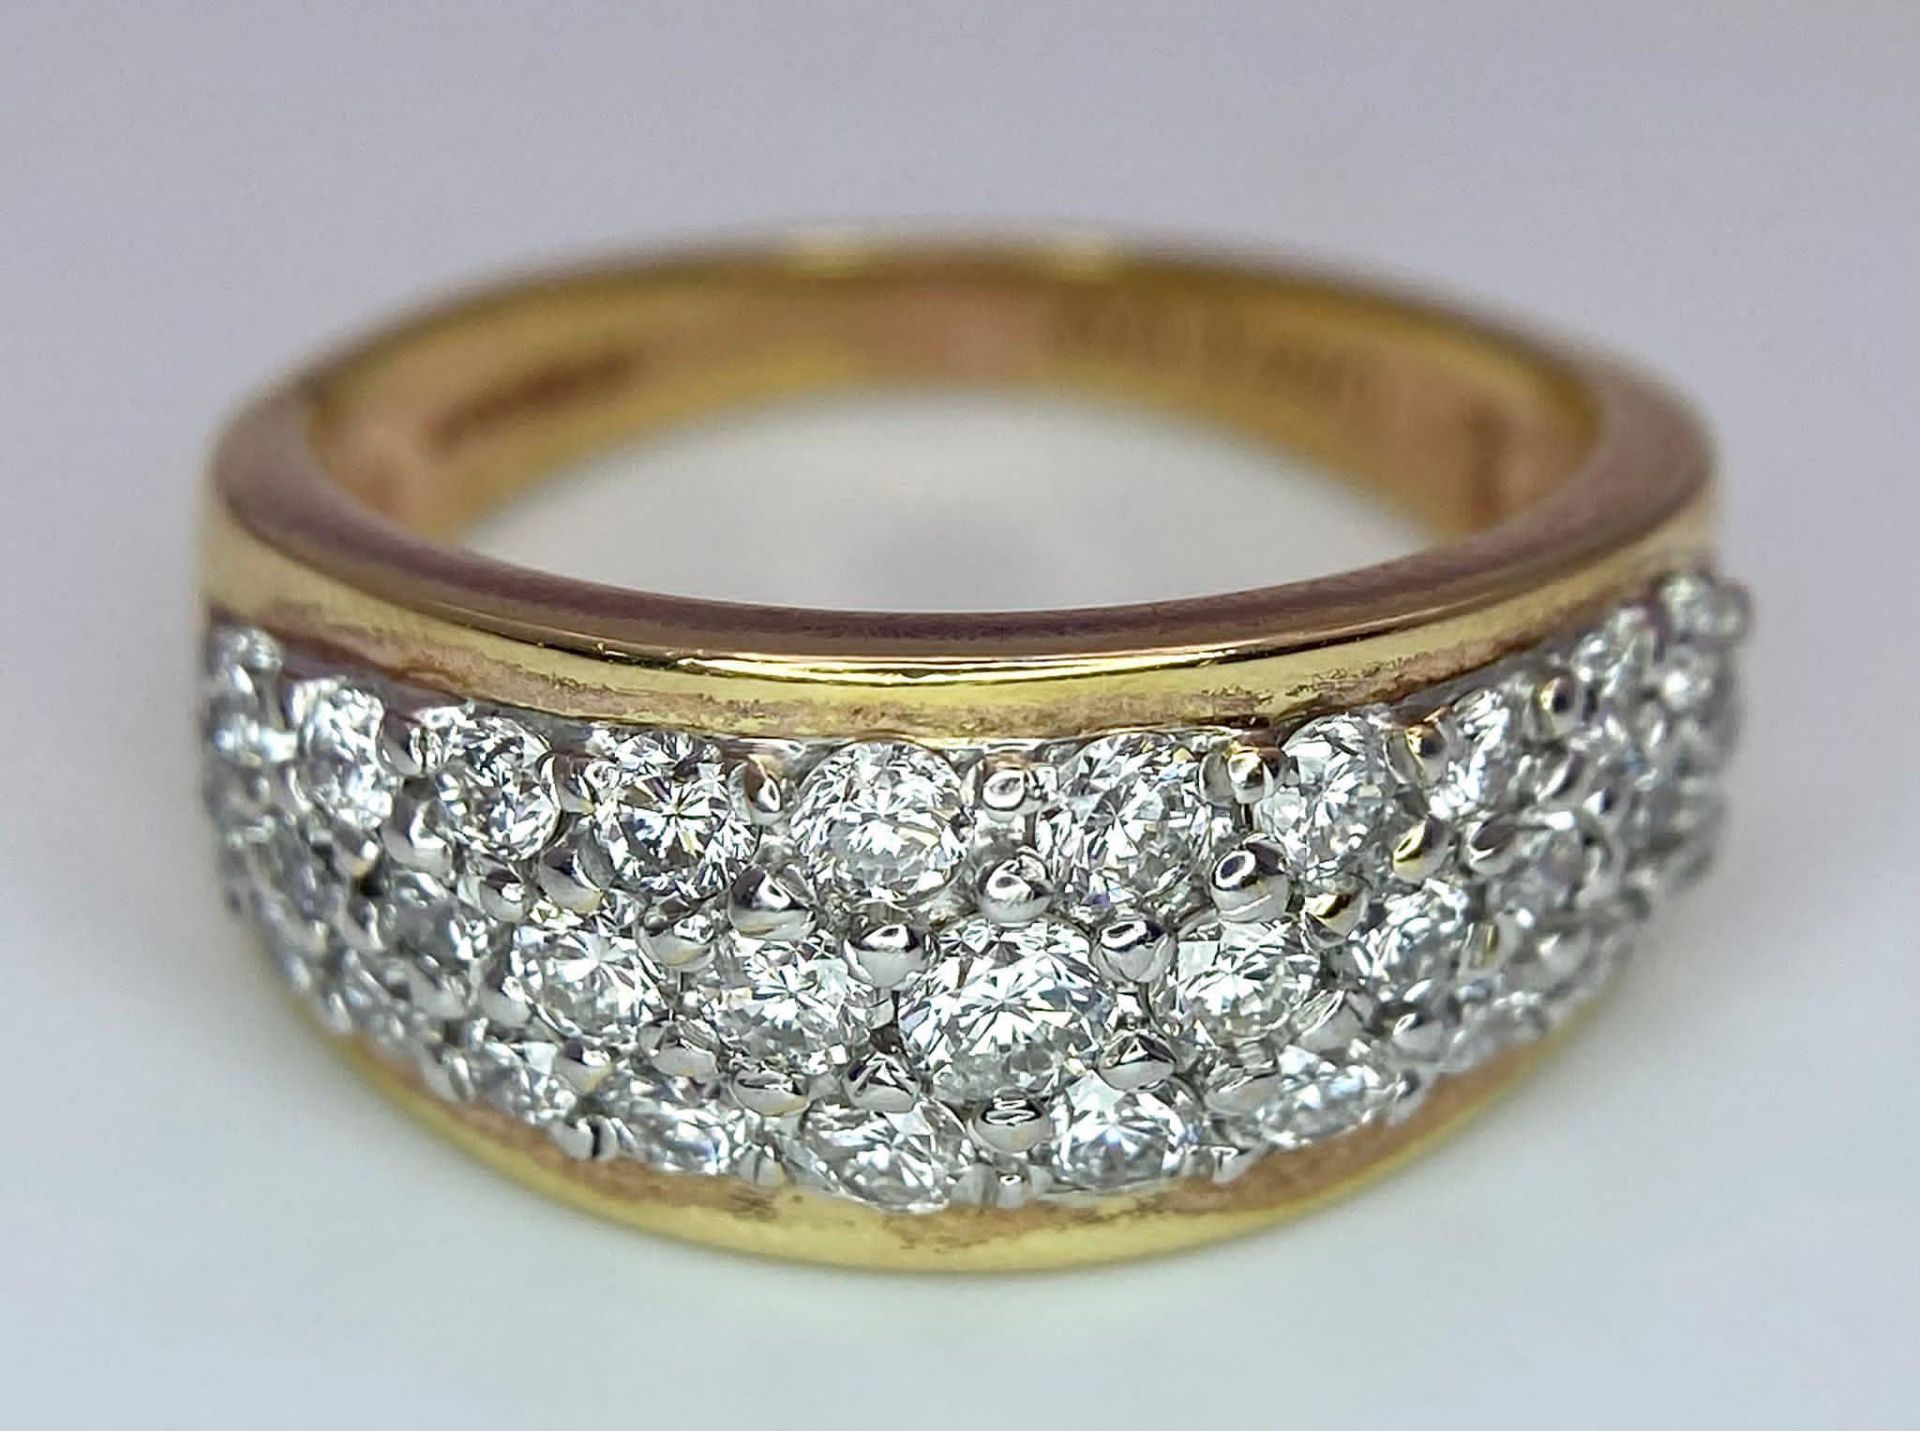 An 18K Yellow Gold Three-Row Cluster Ring. 1ctw. Size M. 5.5g total weight. - Image 7 of 15